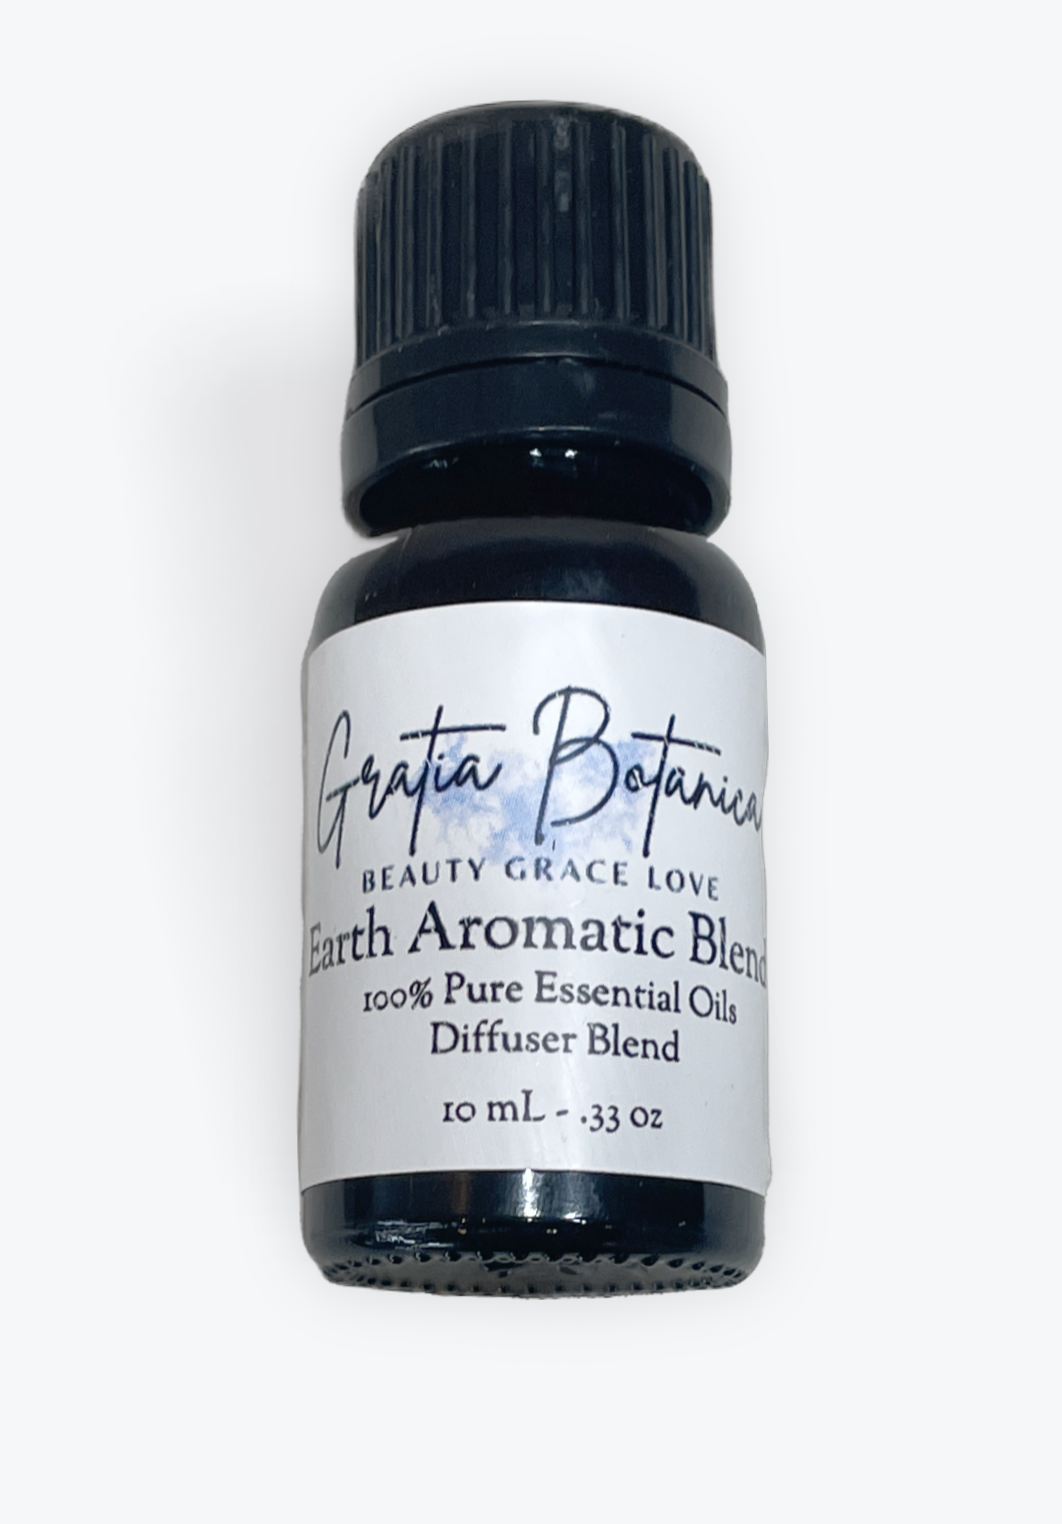 Earth Aromatic Blend